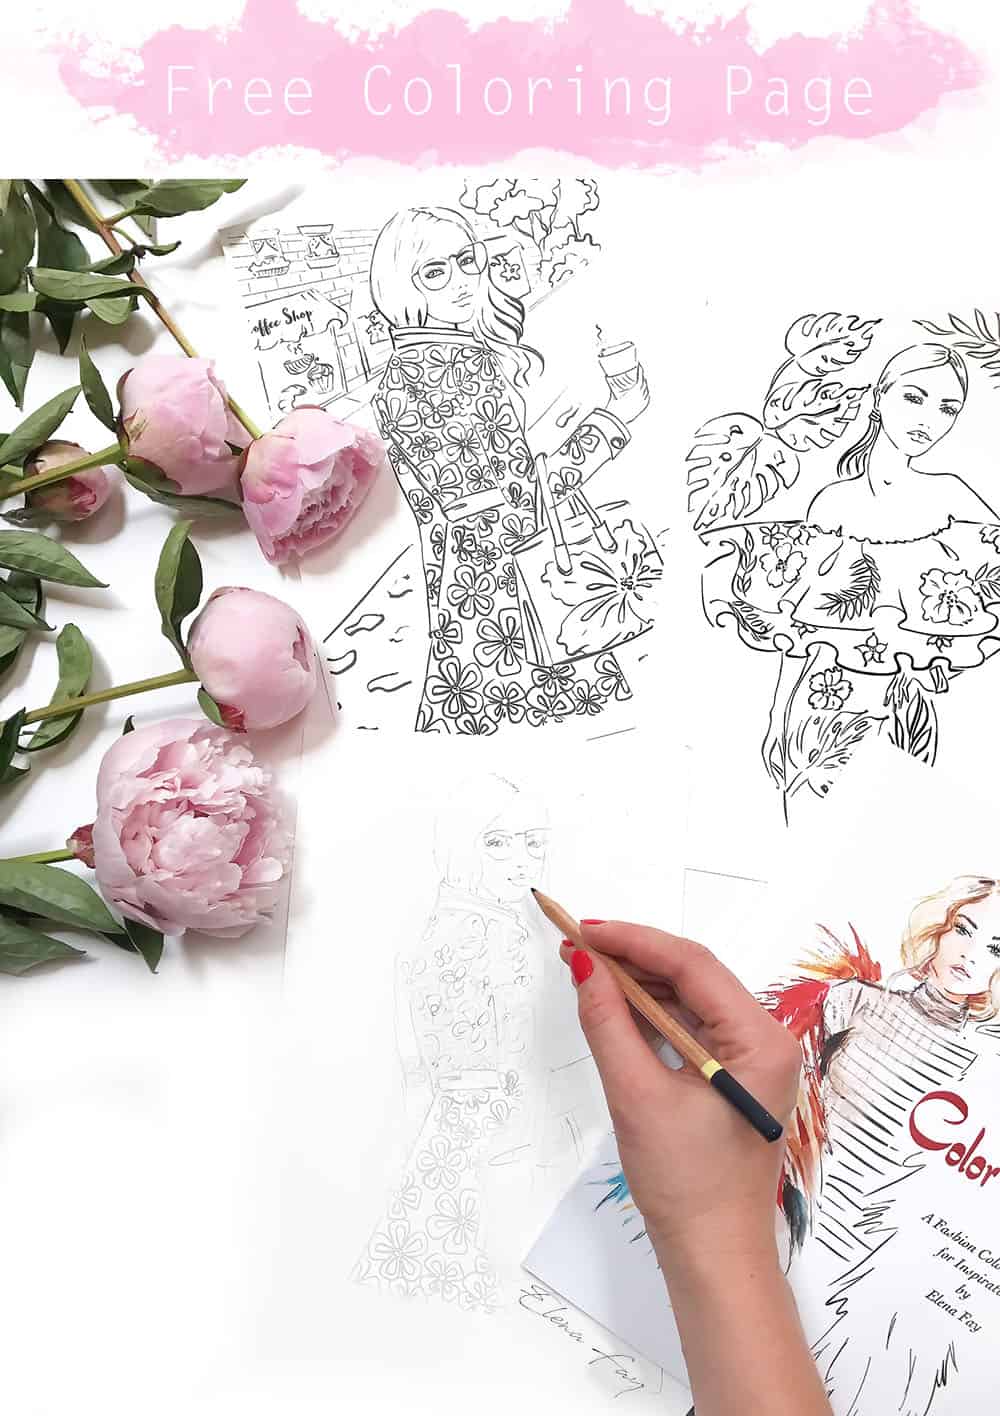 free coloring page, fashion coloring page